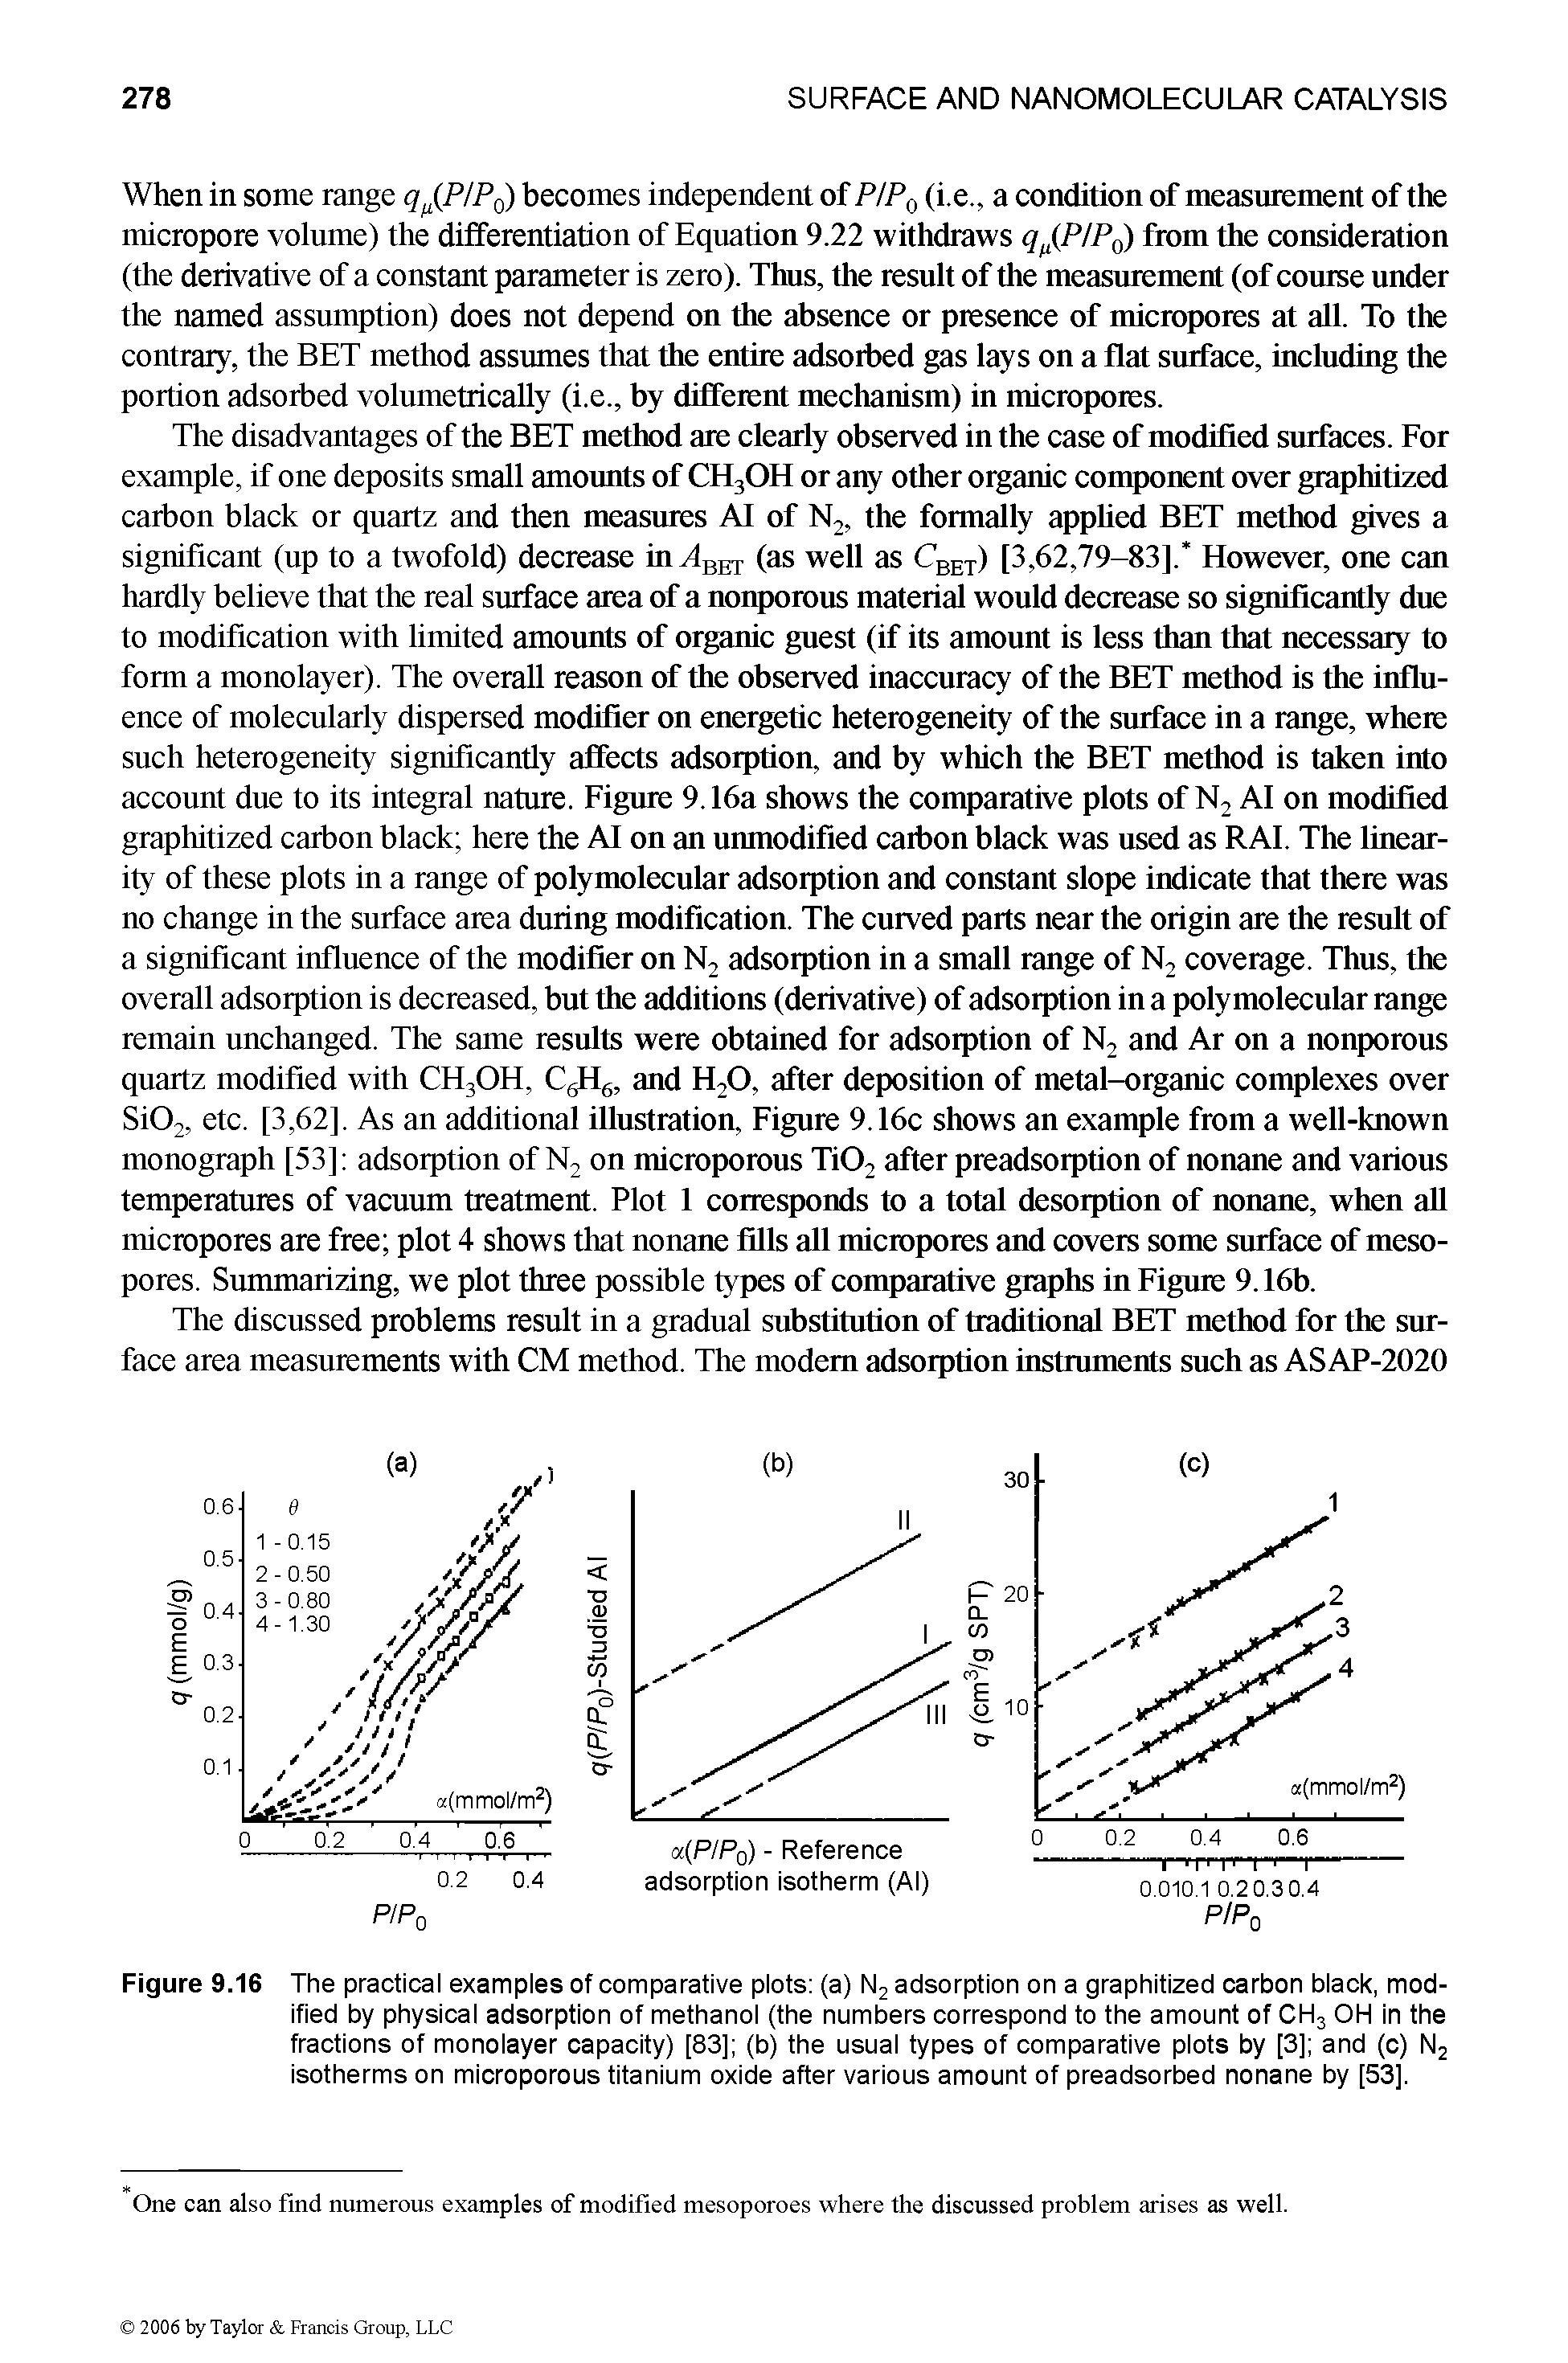 Figure 9.16 The practical examples of comparative plots (a) N2 adsorption on a graphitized carbon black, modified by physical adsorption of methanol (the numbers correspond to the amount of CH3 OH in the fractions of monolayer capacity) [83] (b) the usual types of comparative plots by [3] and (c) N2 isotherms on microporous titanium oxide after various amount of preadsorbed nonane by [53].